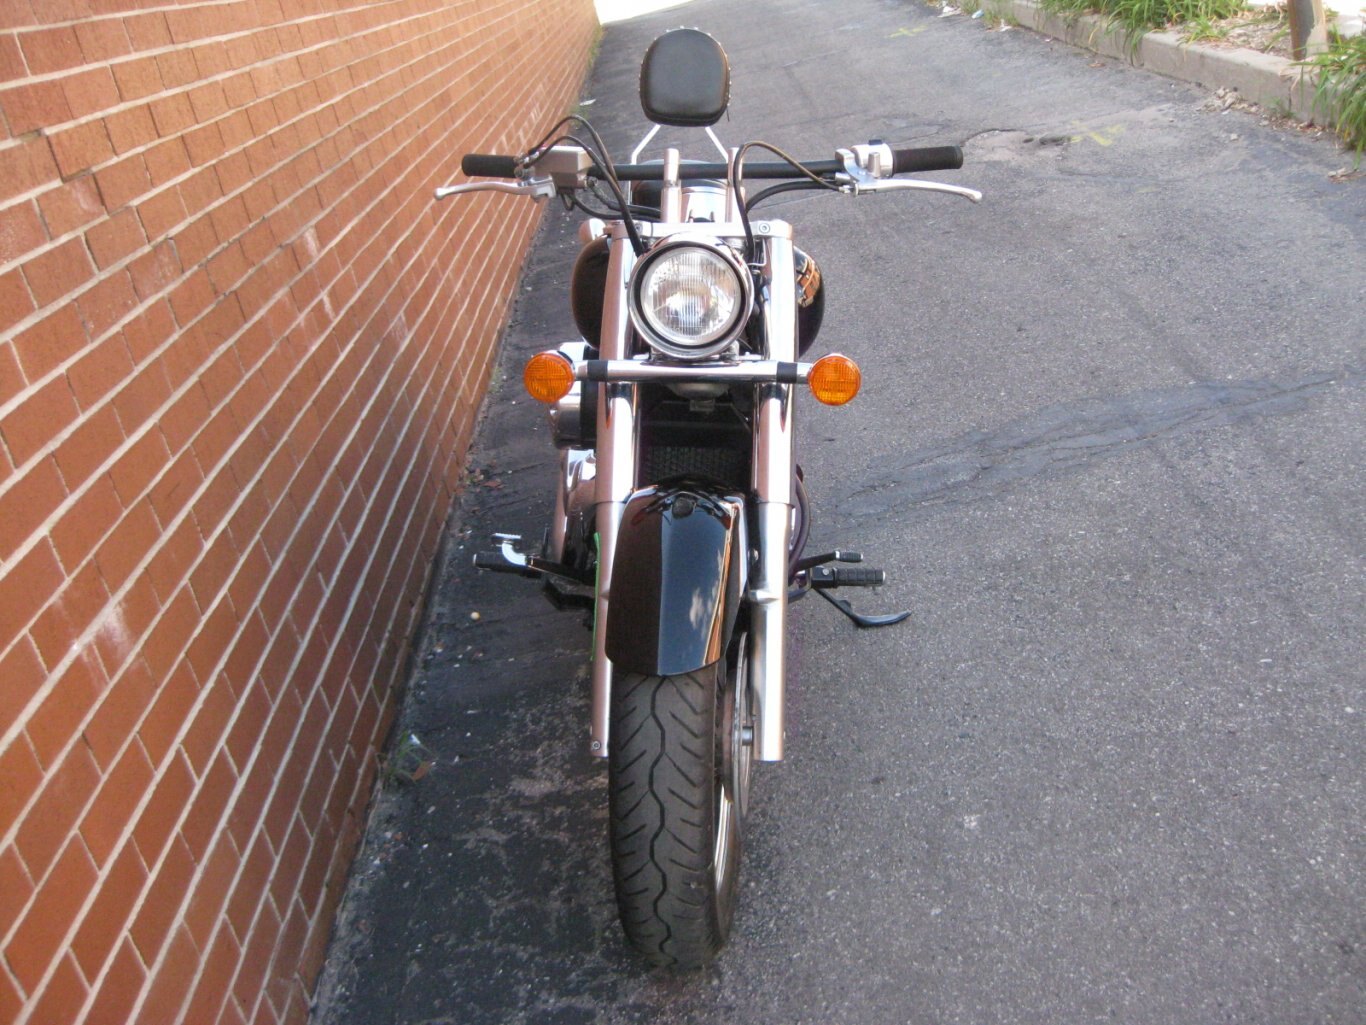 2005 Honda Shadow Aero (VT750) SOLD CONGRATULATIONS MOTORCYCLE T WELCOME TO THE WORLD OF TWO WHEELED EXCITEMENT!